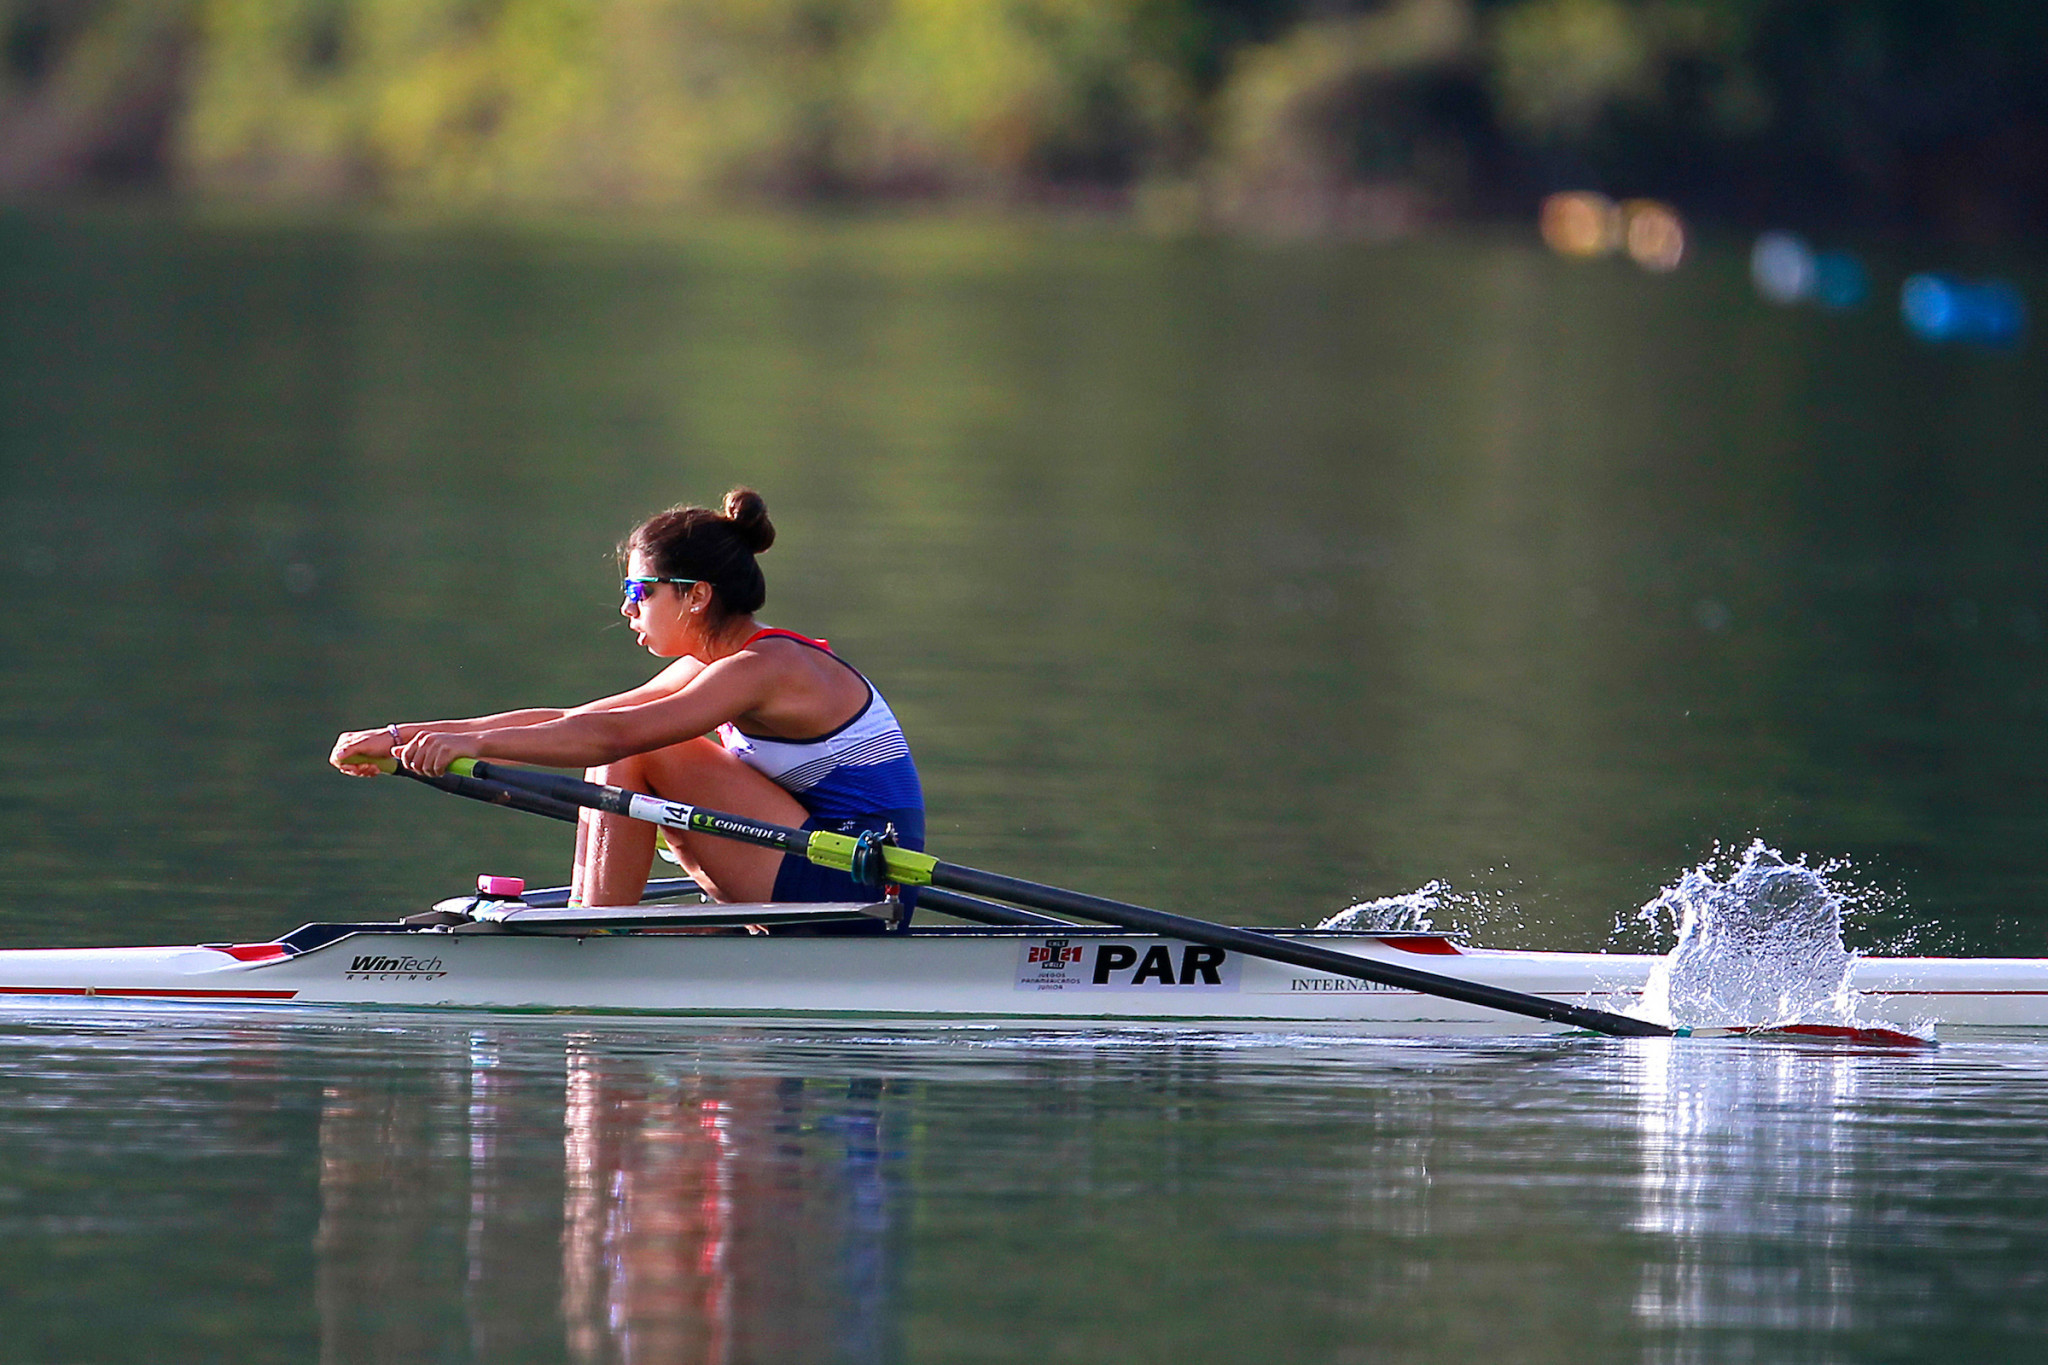 Nicole Martine of Paraguay powered to victory in the women's single sculls rowing event in 7min 43.43sec ©Agencia.Xpress Media